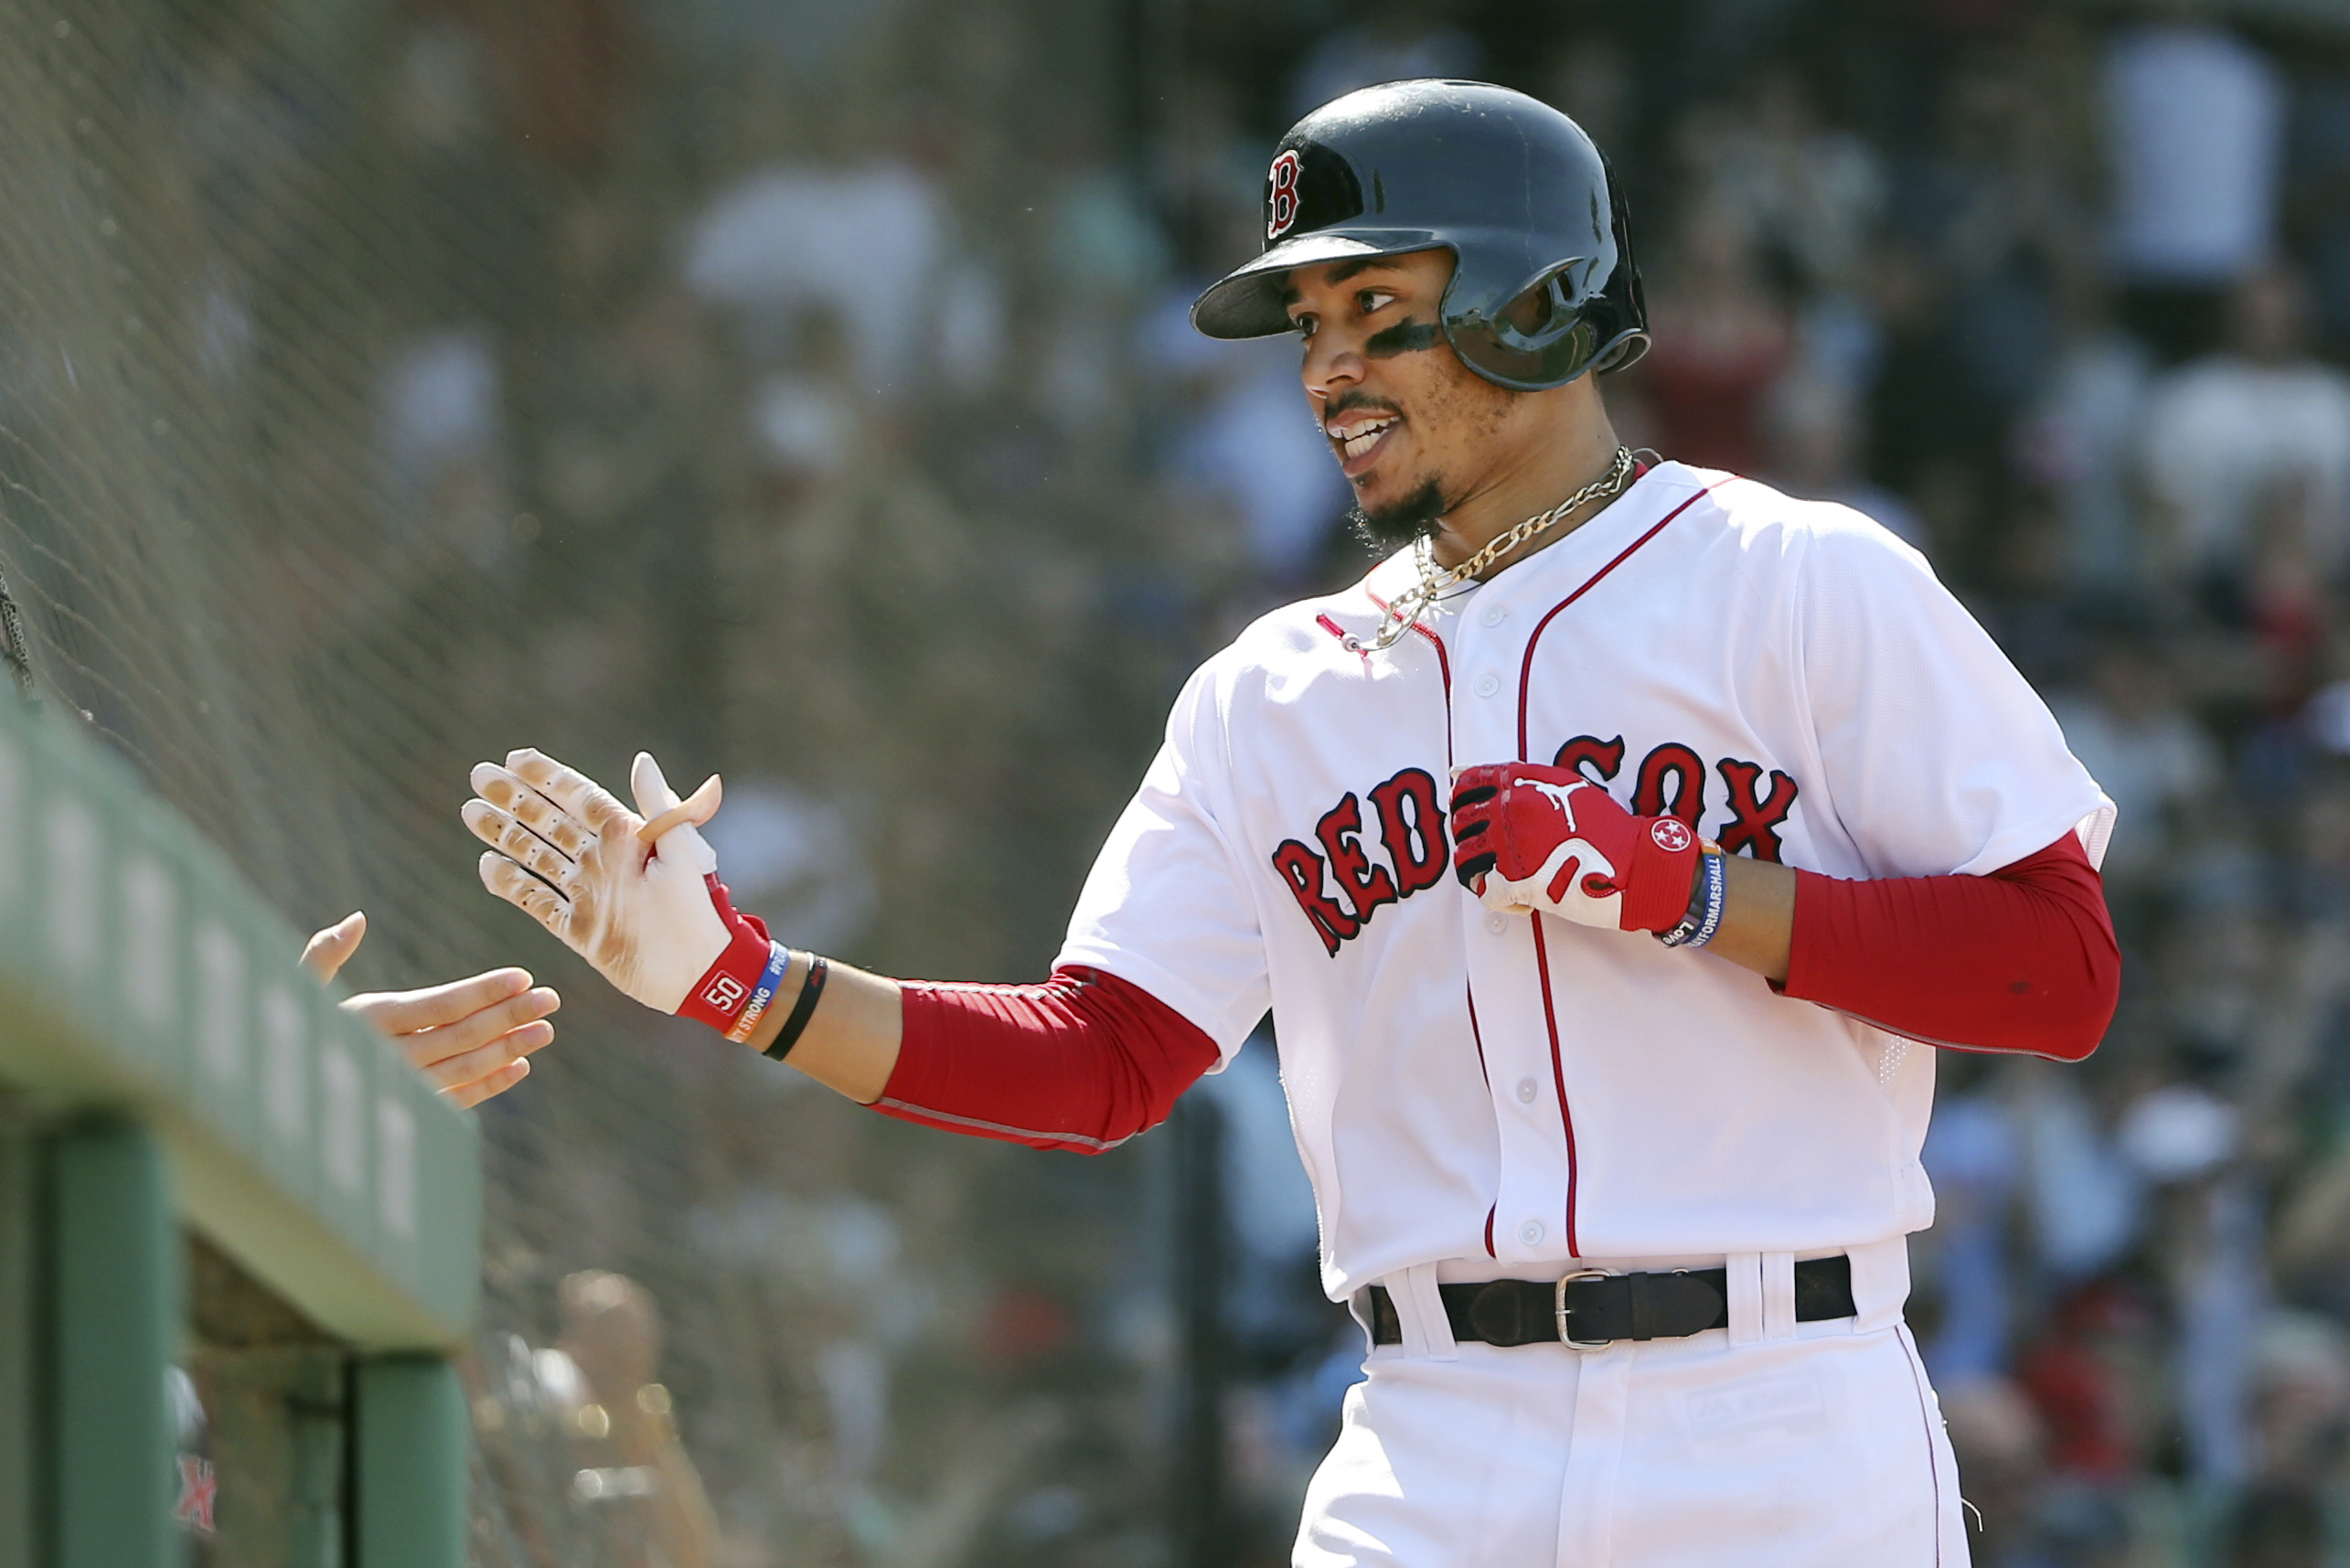 New York Yankees dominated by Boston Red Sox; Mookie Betts hits 3 HR